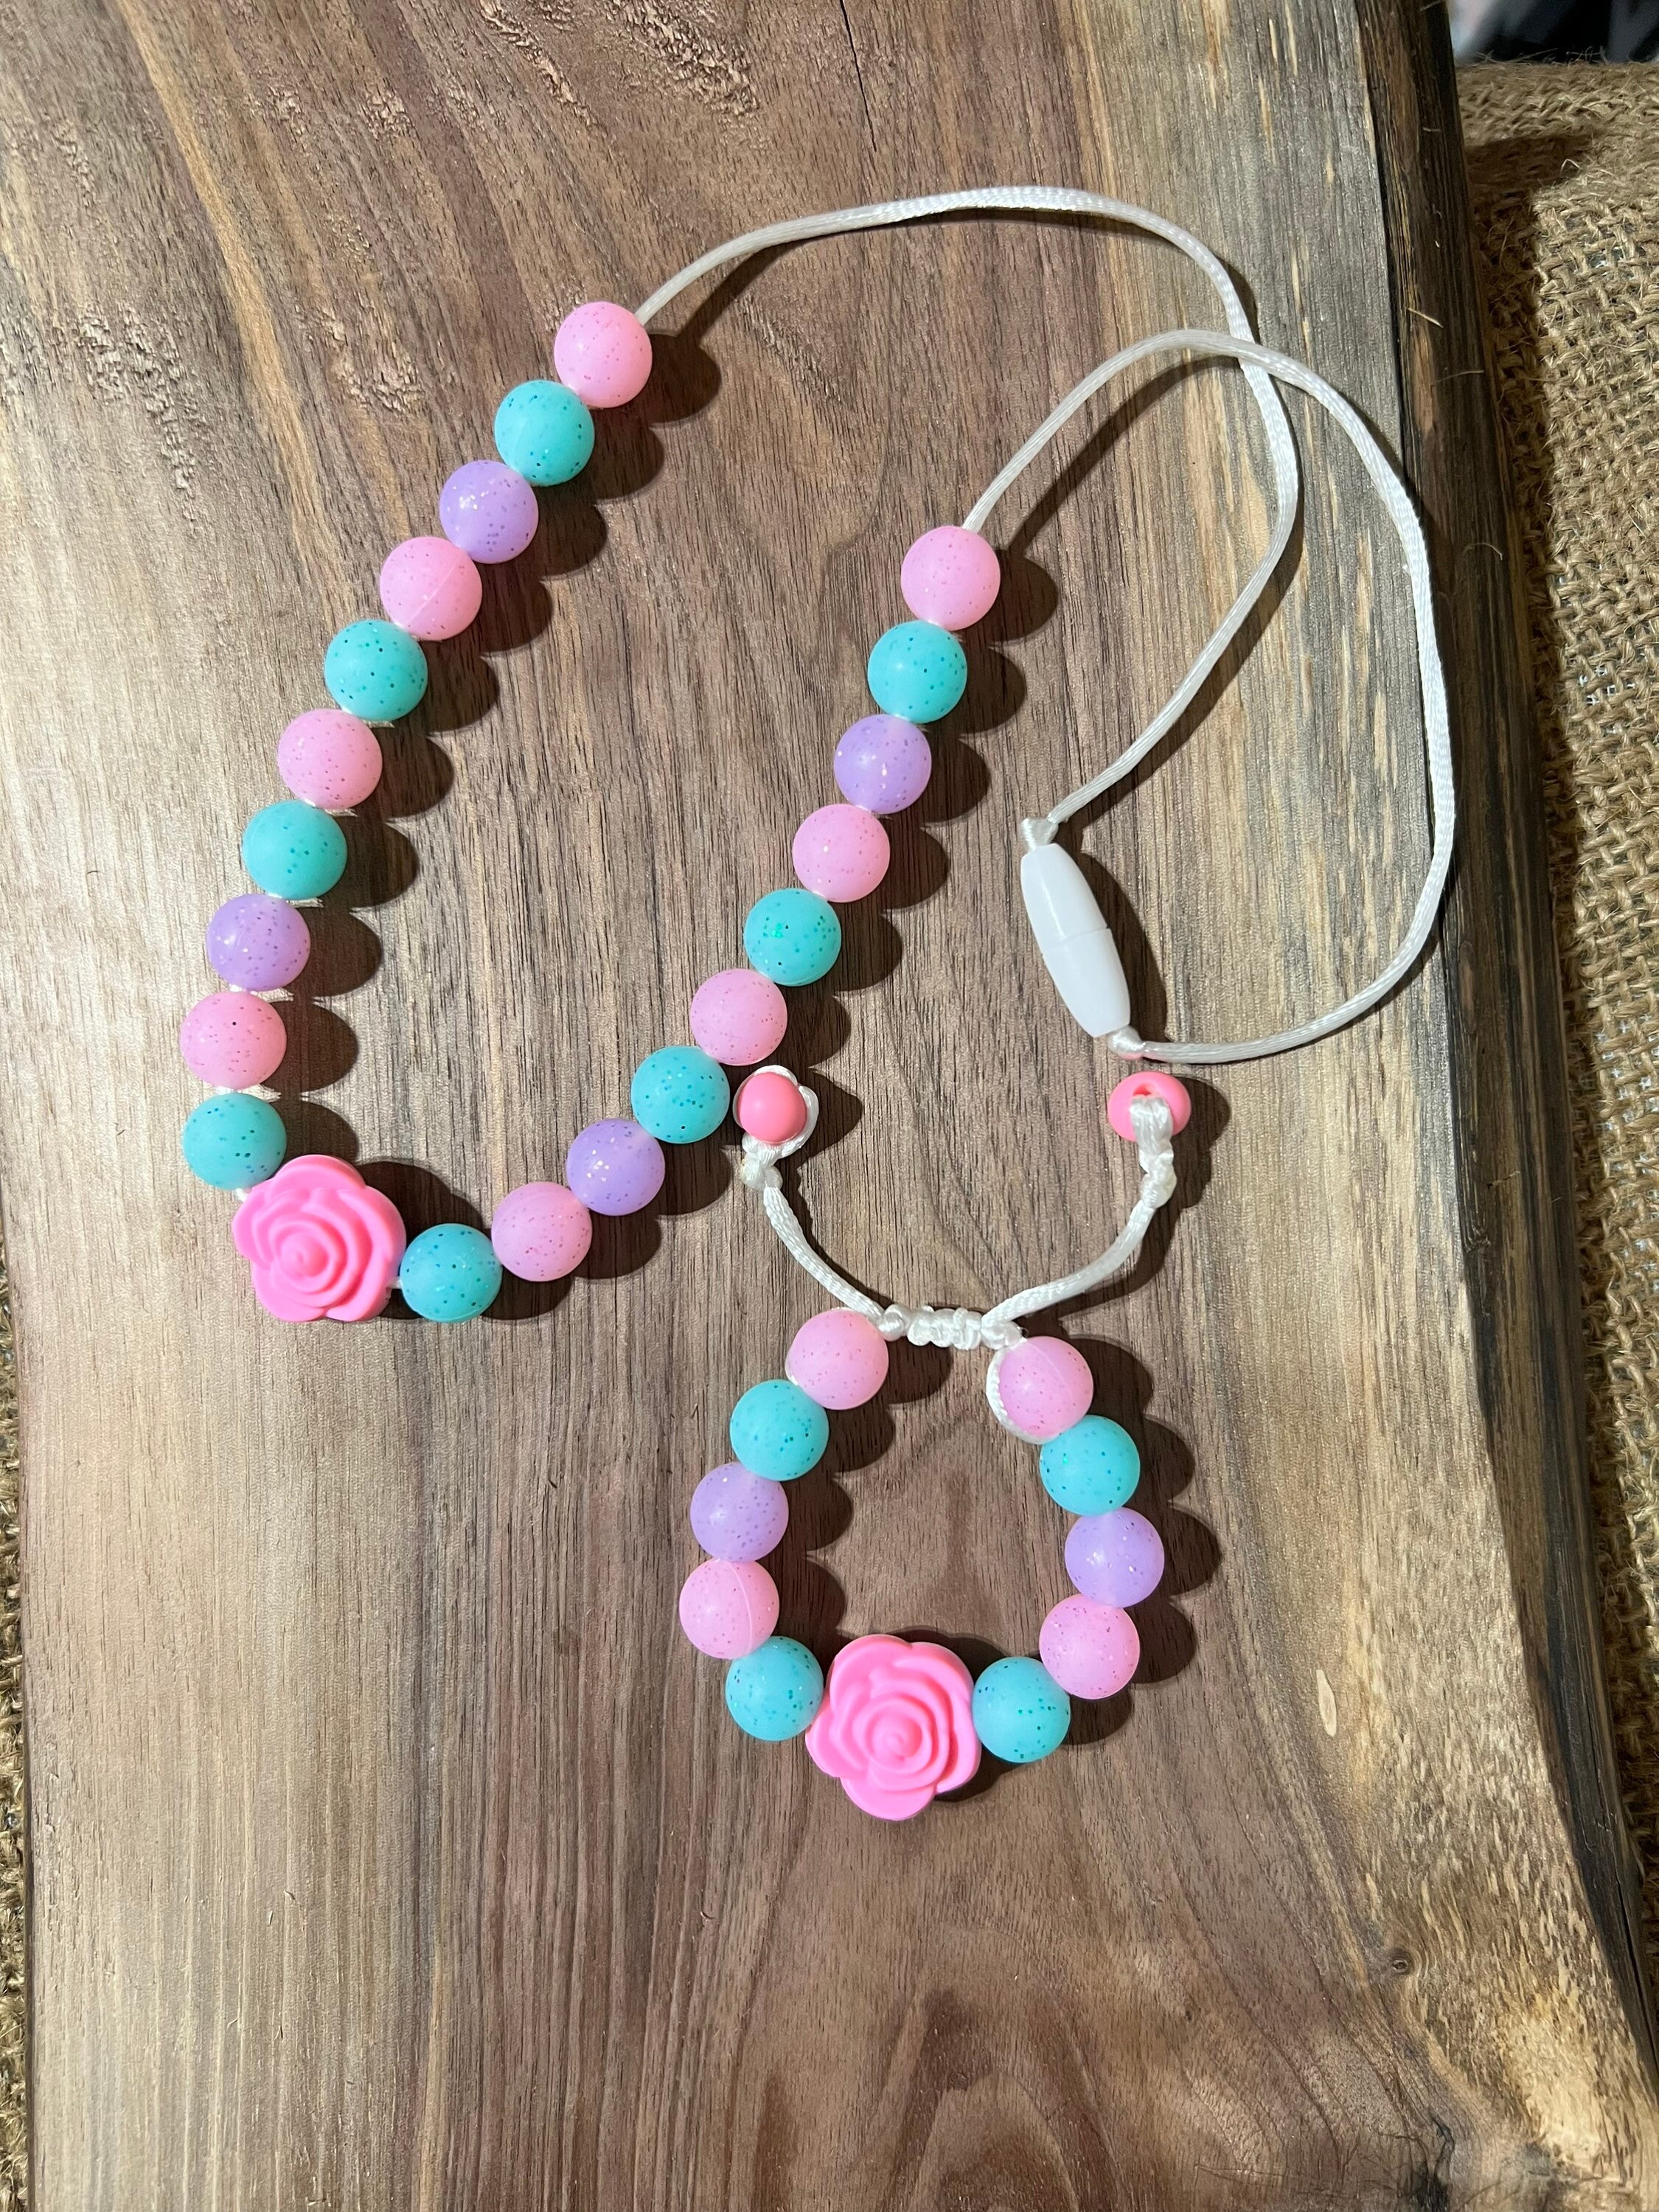 Girls Necklace, Bow, Bracelet, Toddler Jewelry, Bow Necklace, Little Girls  Jewelry, Party Favor, Birthday Party Favor, Toddler Necklace 